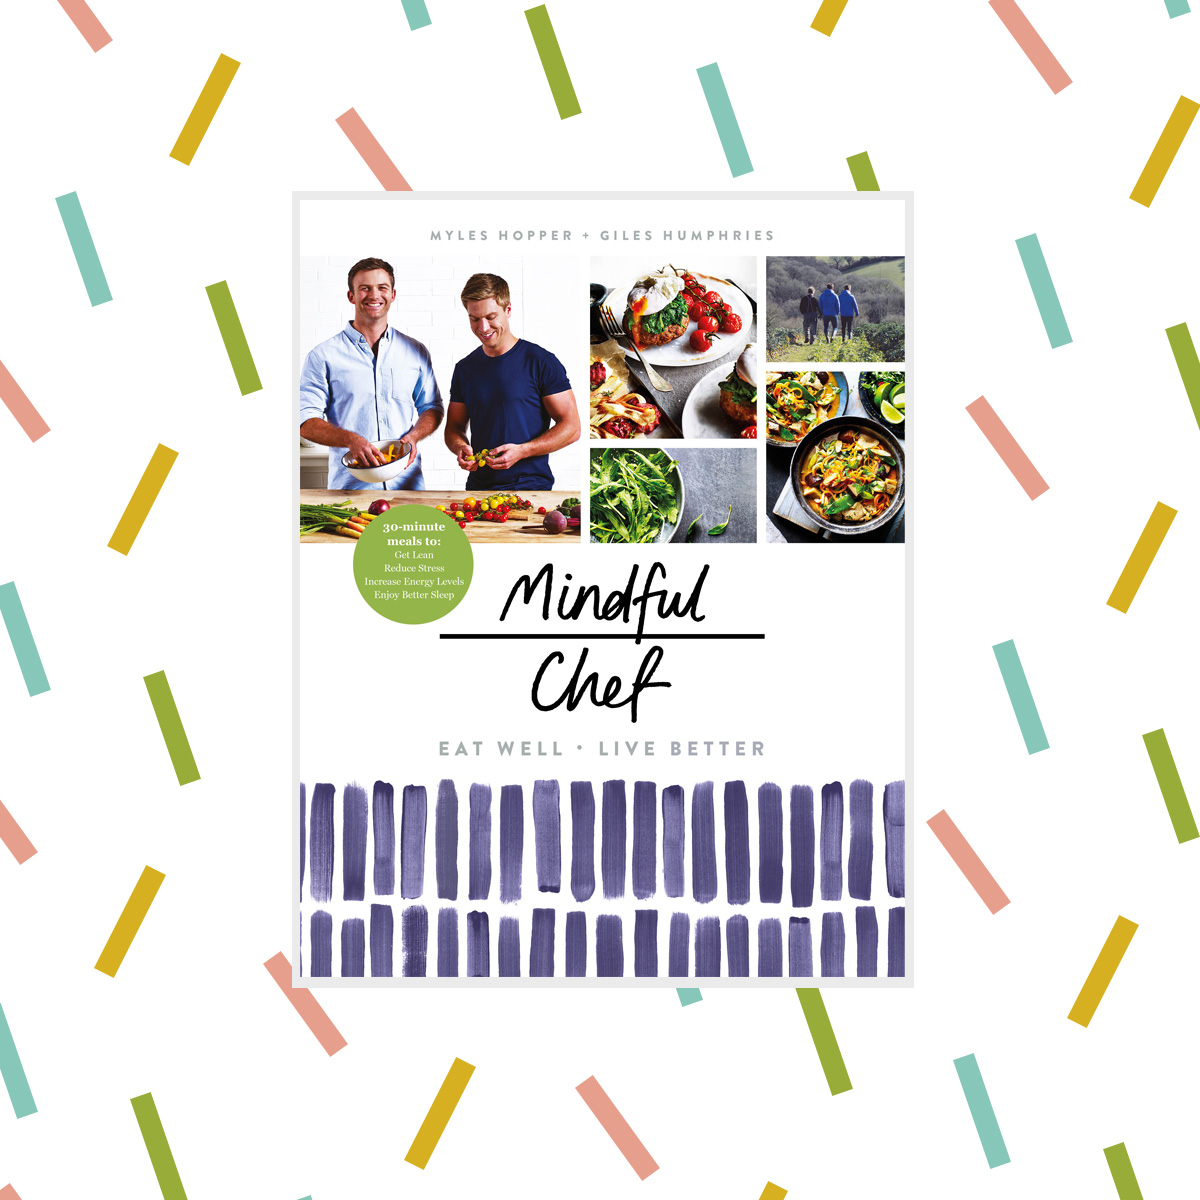 The Mindful Chef